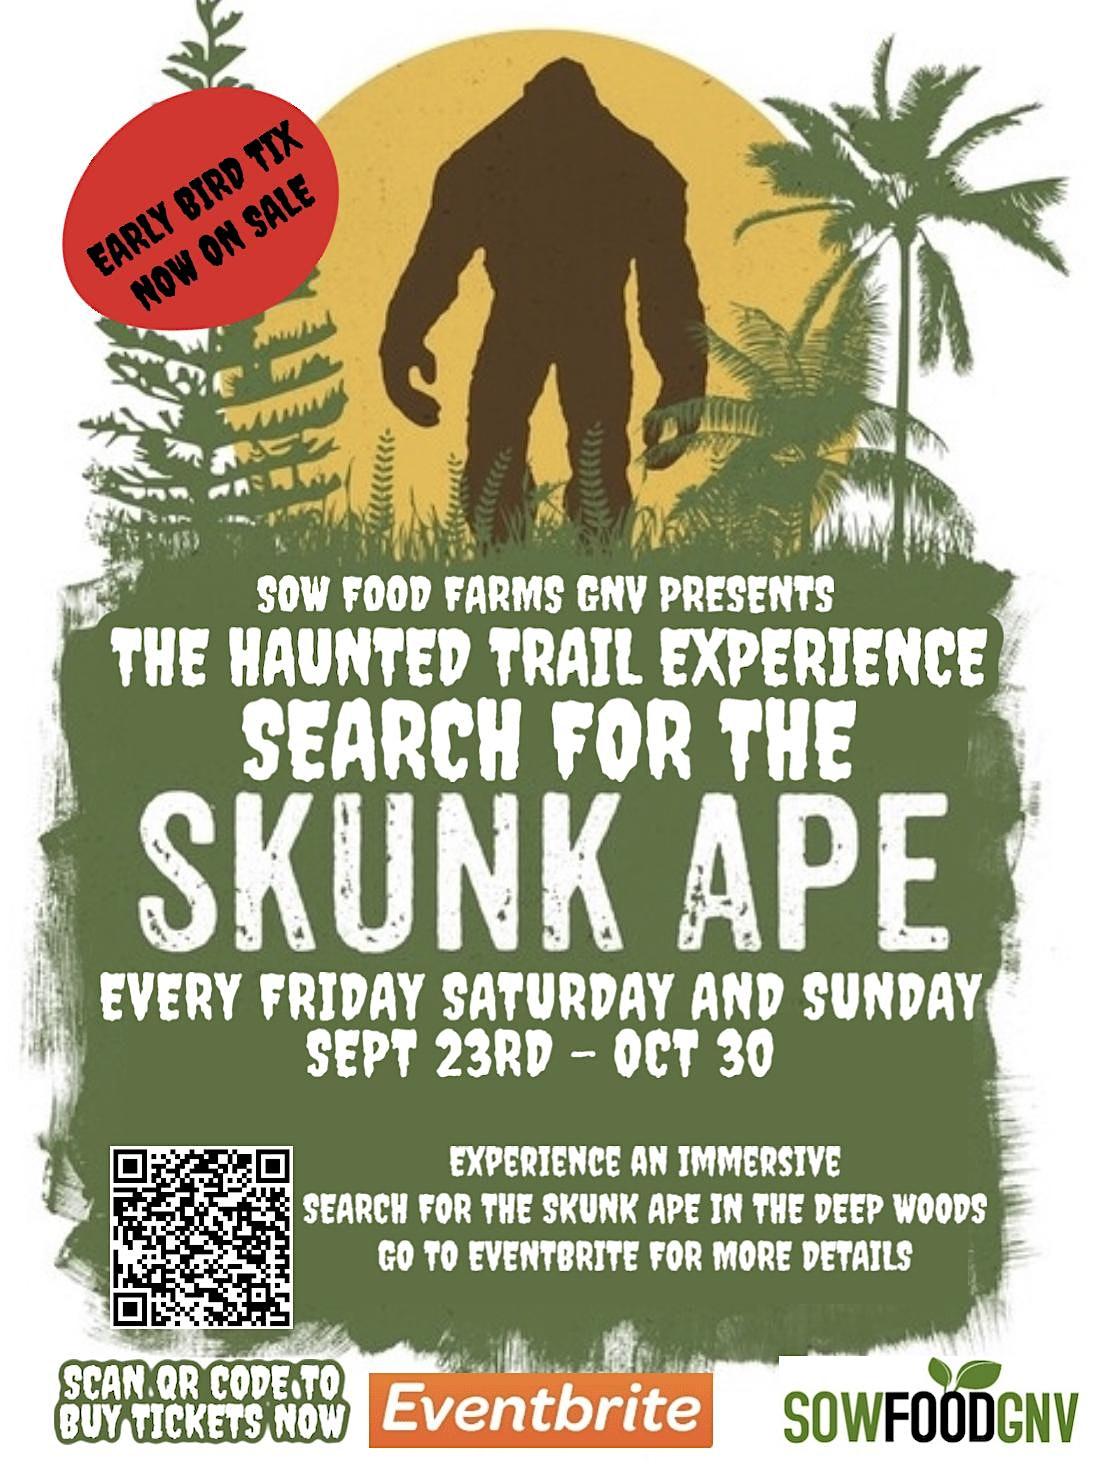 THE HAUNTED FOREST EXPERIENCE (SEARCH FOR THE SKUNK APE)
Fri Oct 21, 7:00 PM - Fri Oct 21, 10:00 PM
in 2 days